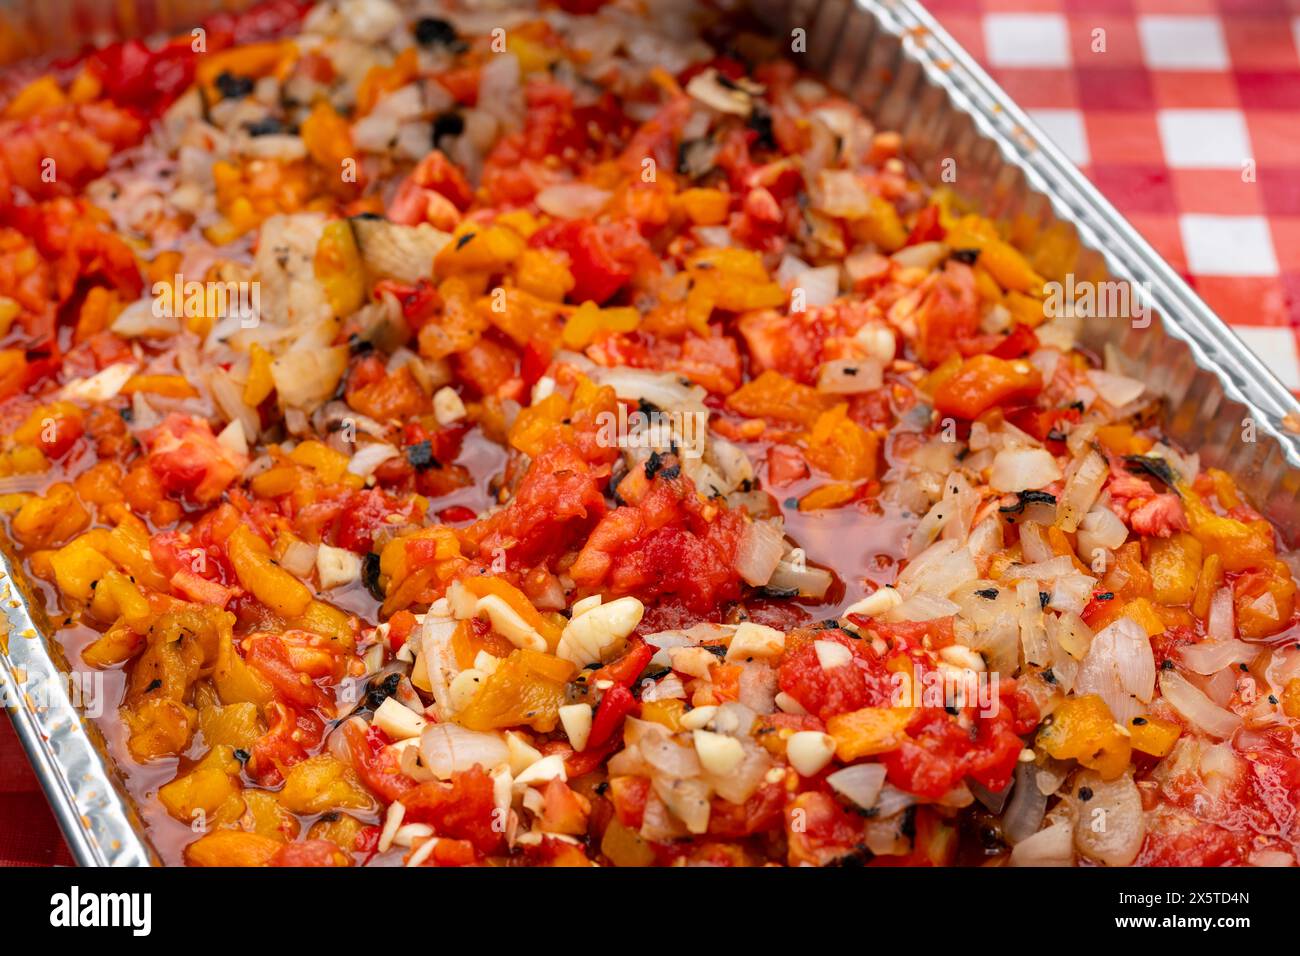 Roasted salsa with spices, peppers, onions, garlic, and tomatoes in an aluminum steam table pan. Party catering concept. Stock Photo